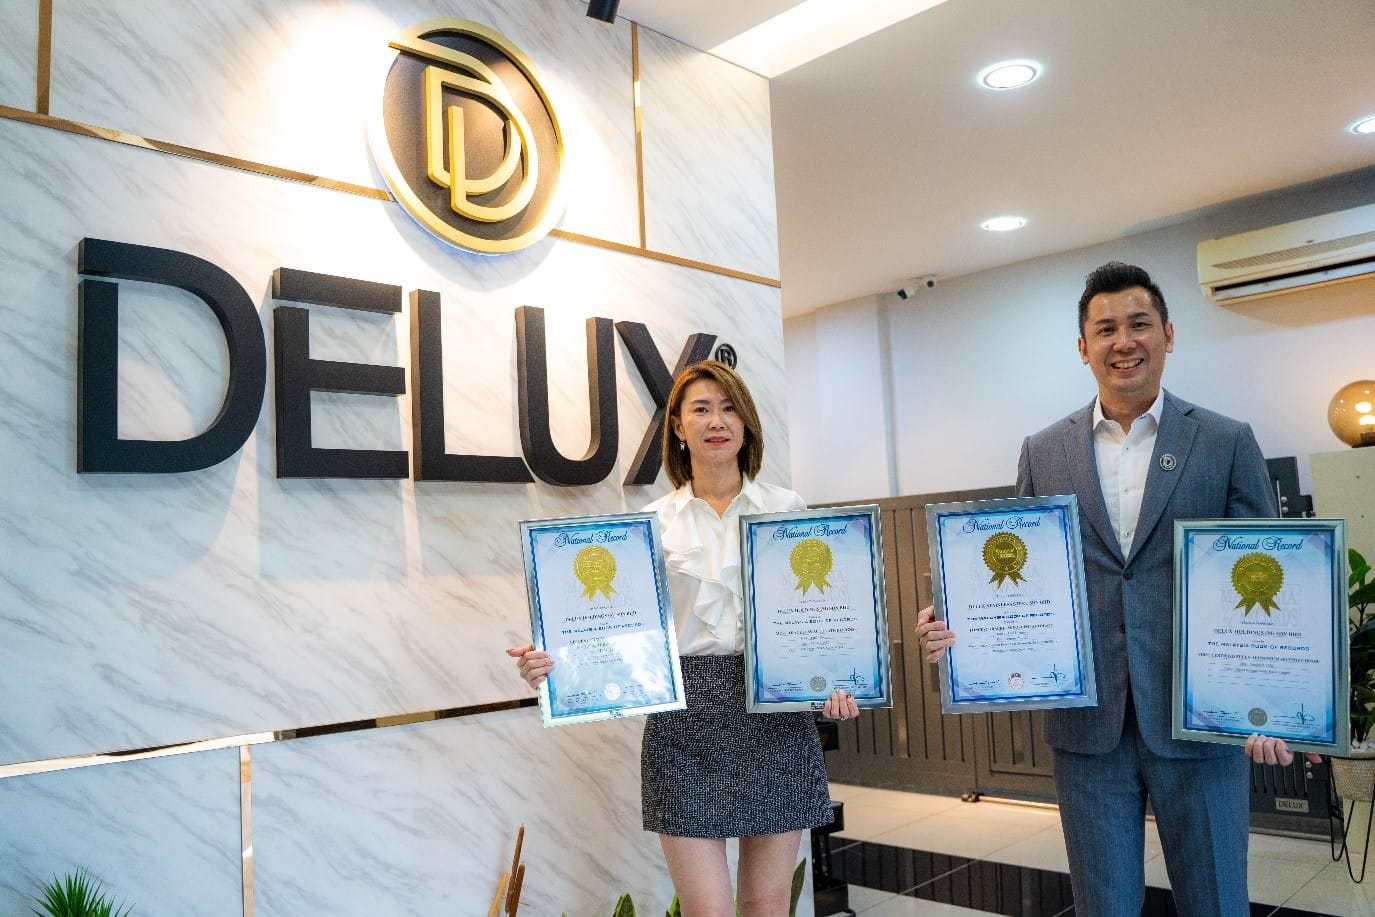 DELUX has earned three more Malaysia Book of Records, Delux